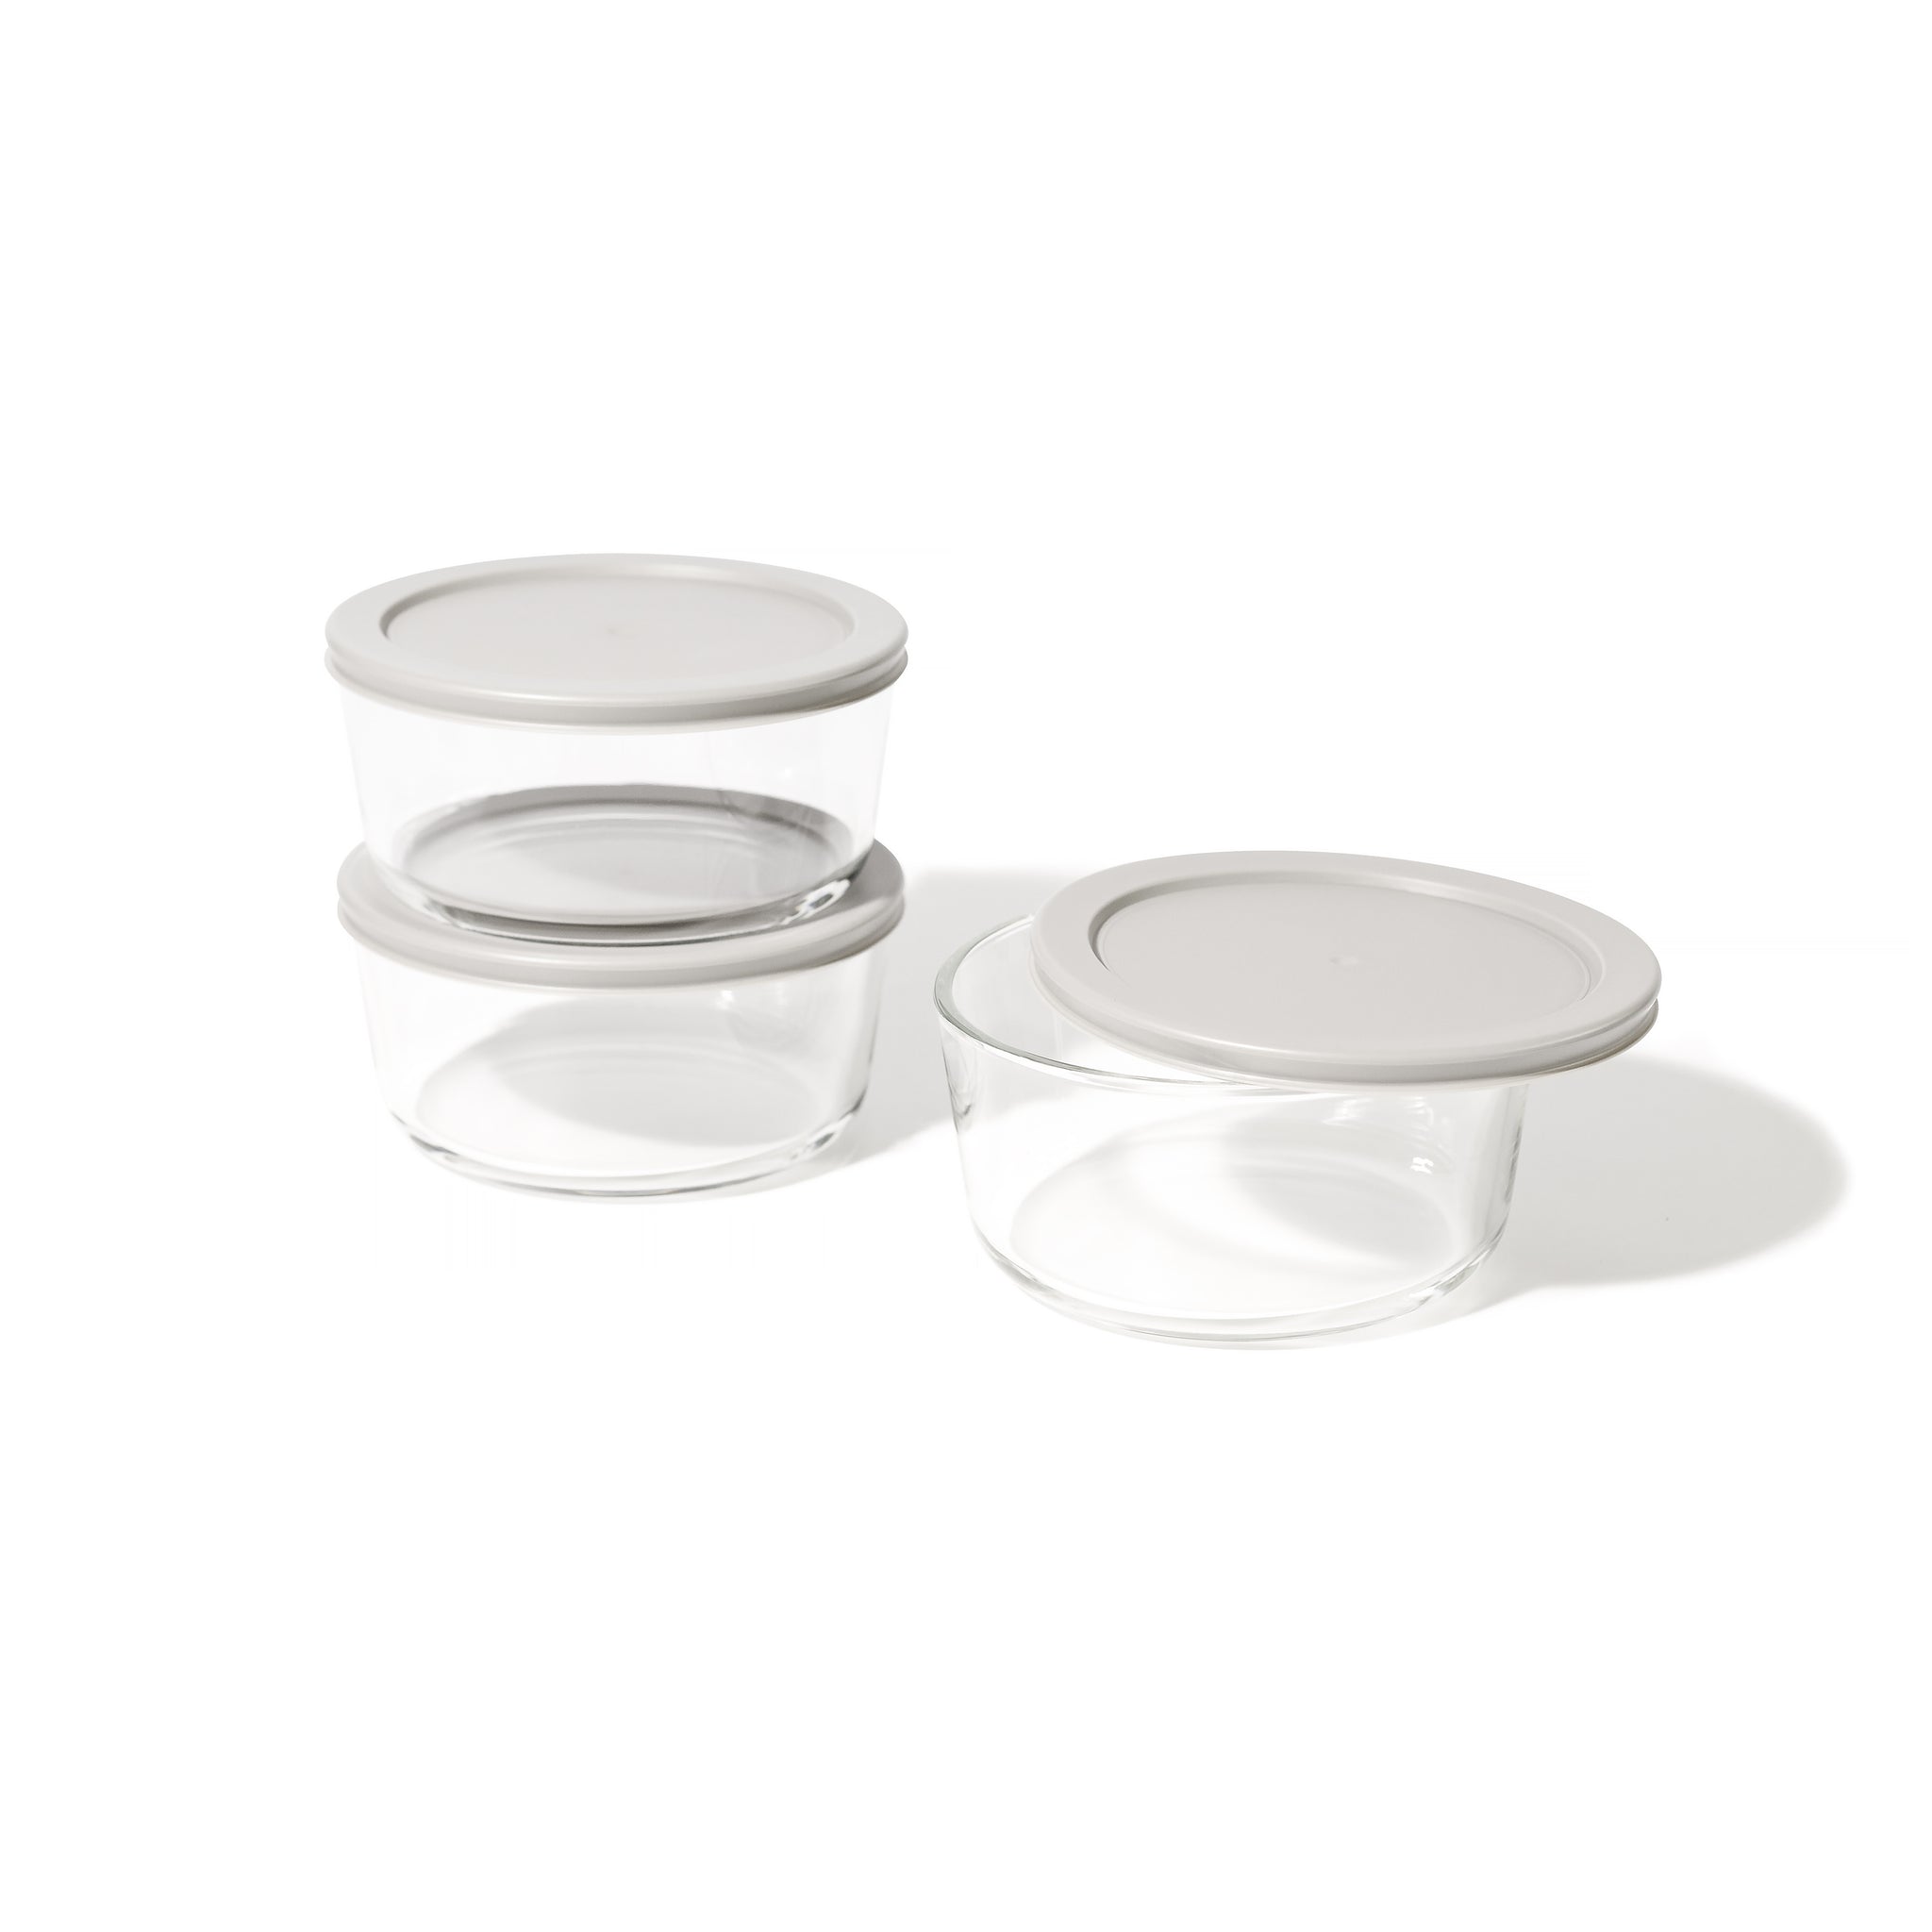 Glass Food Storage Containers - 6 Piece 4 Cup Set (3 Containers + 3 Lids) BPA-Free Lids